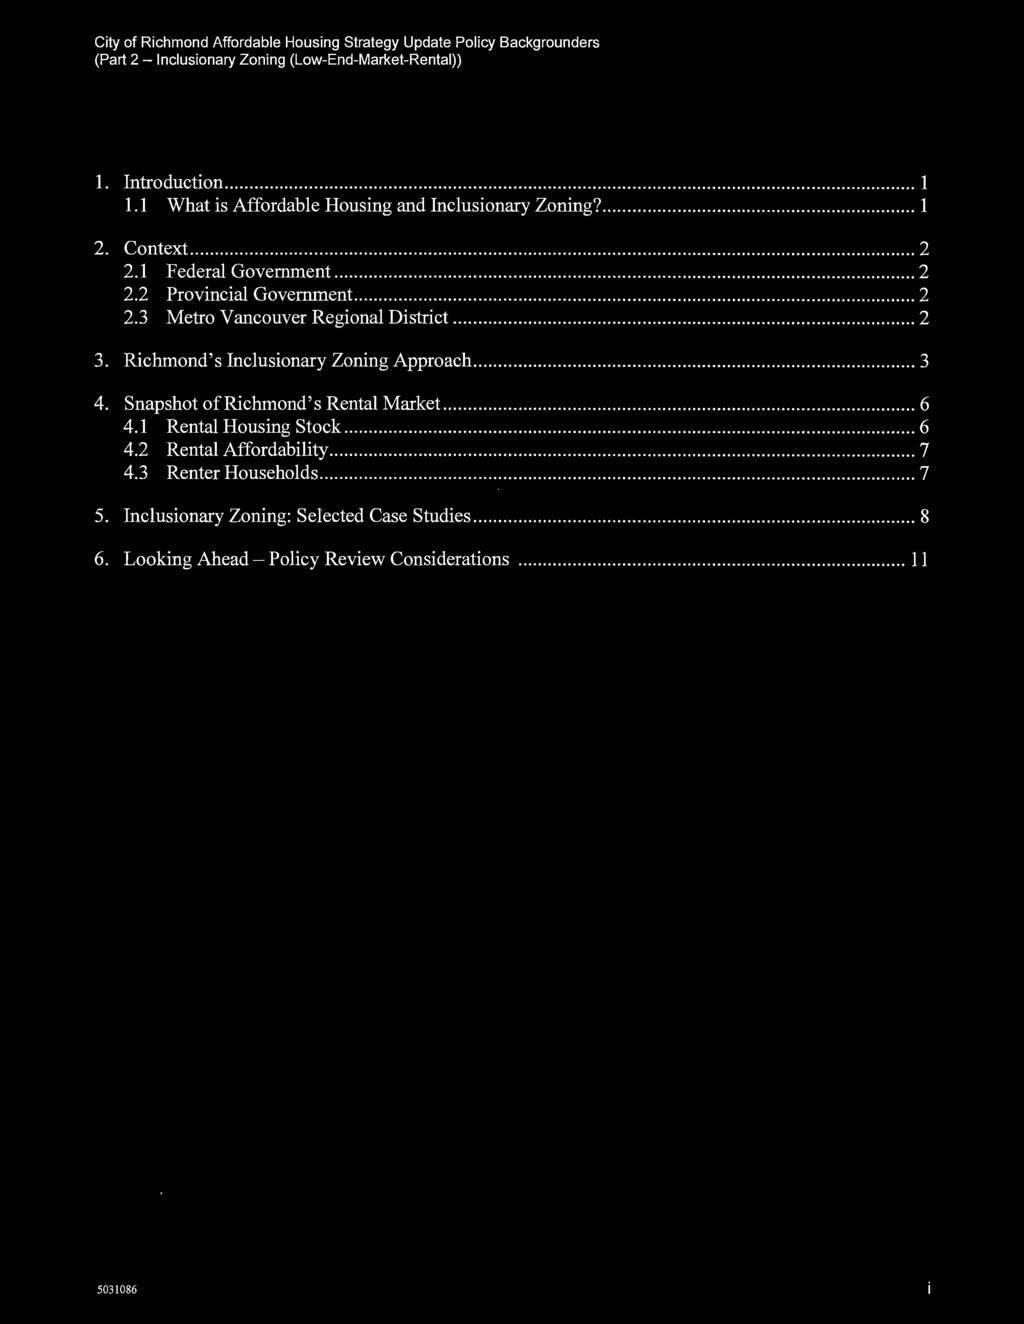 Table of Contents 1. Introduction... 1 1.1 What is Affordable Housing and Inclusionary Zoning?...... 1 2. Context............ 2 2.1 Federal Government... 2 2.2 Provincial Government... 2 2.3 Metro Vancouver Regional District.